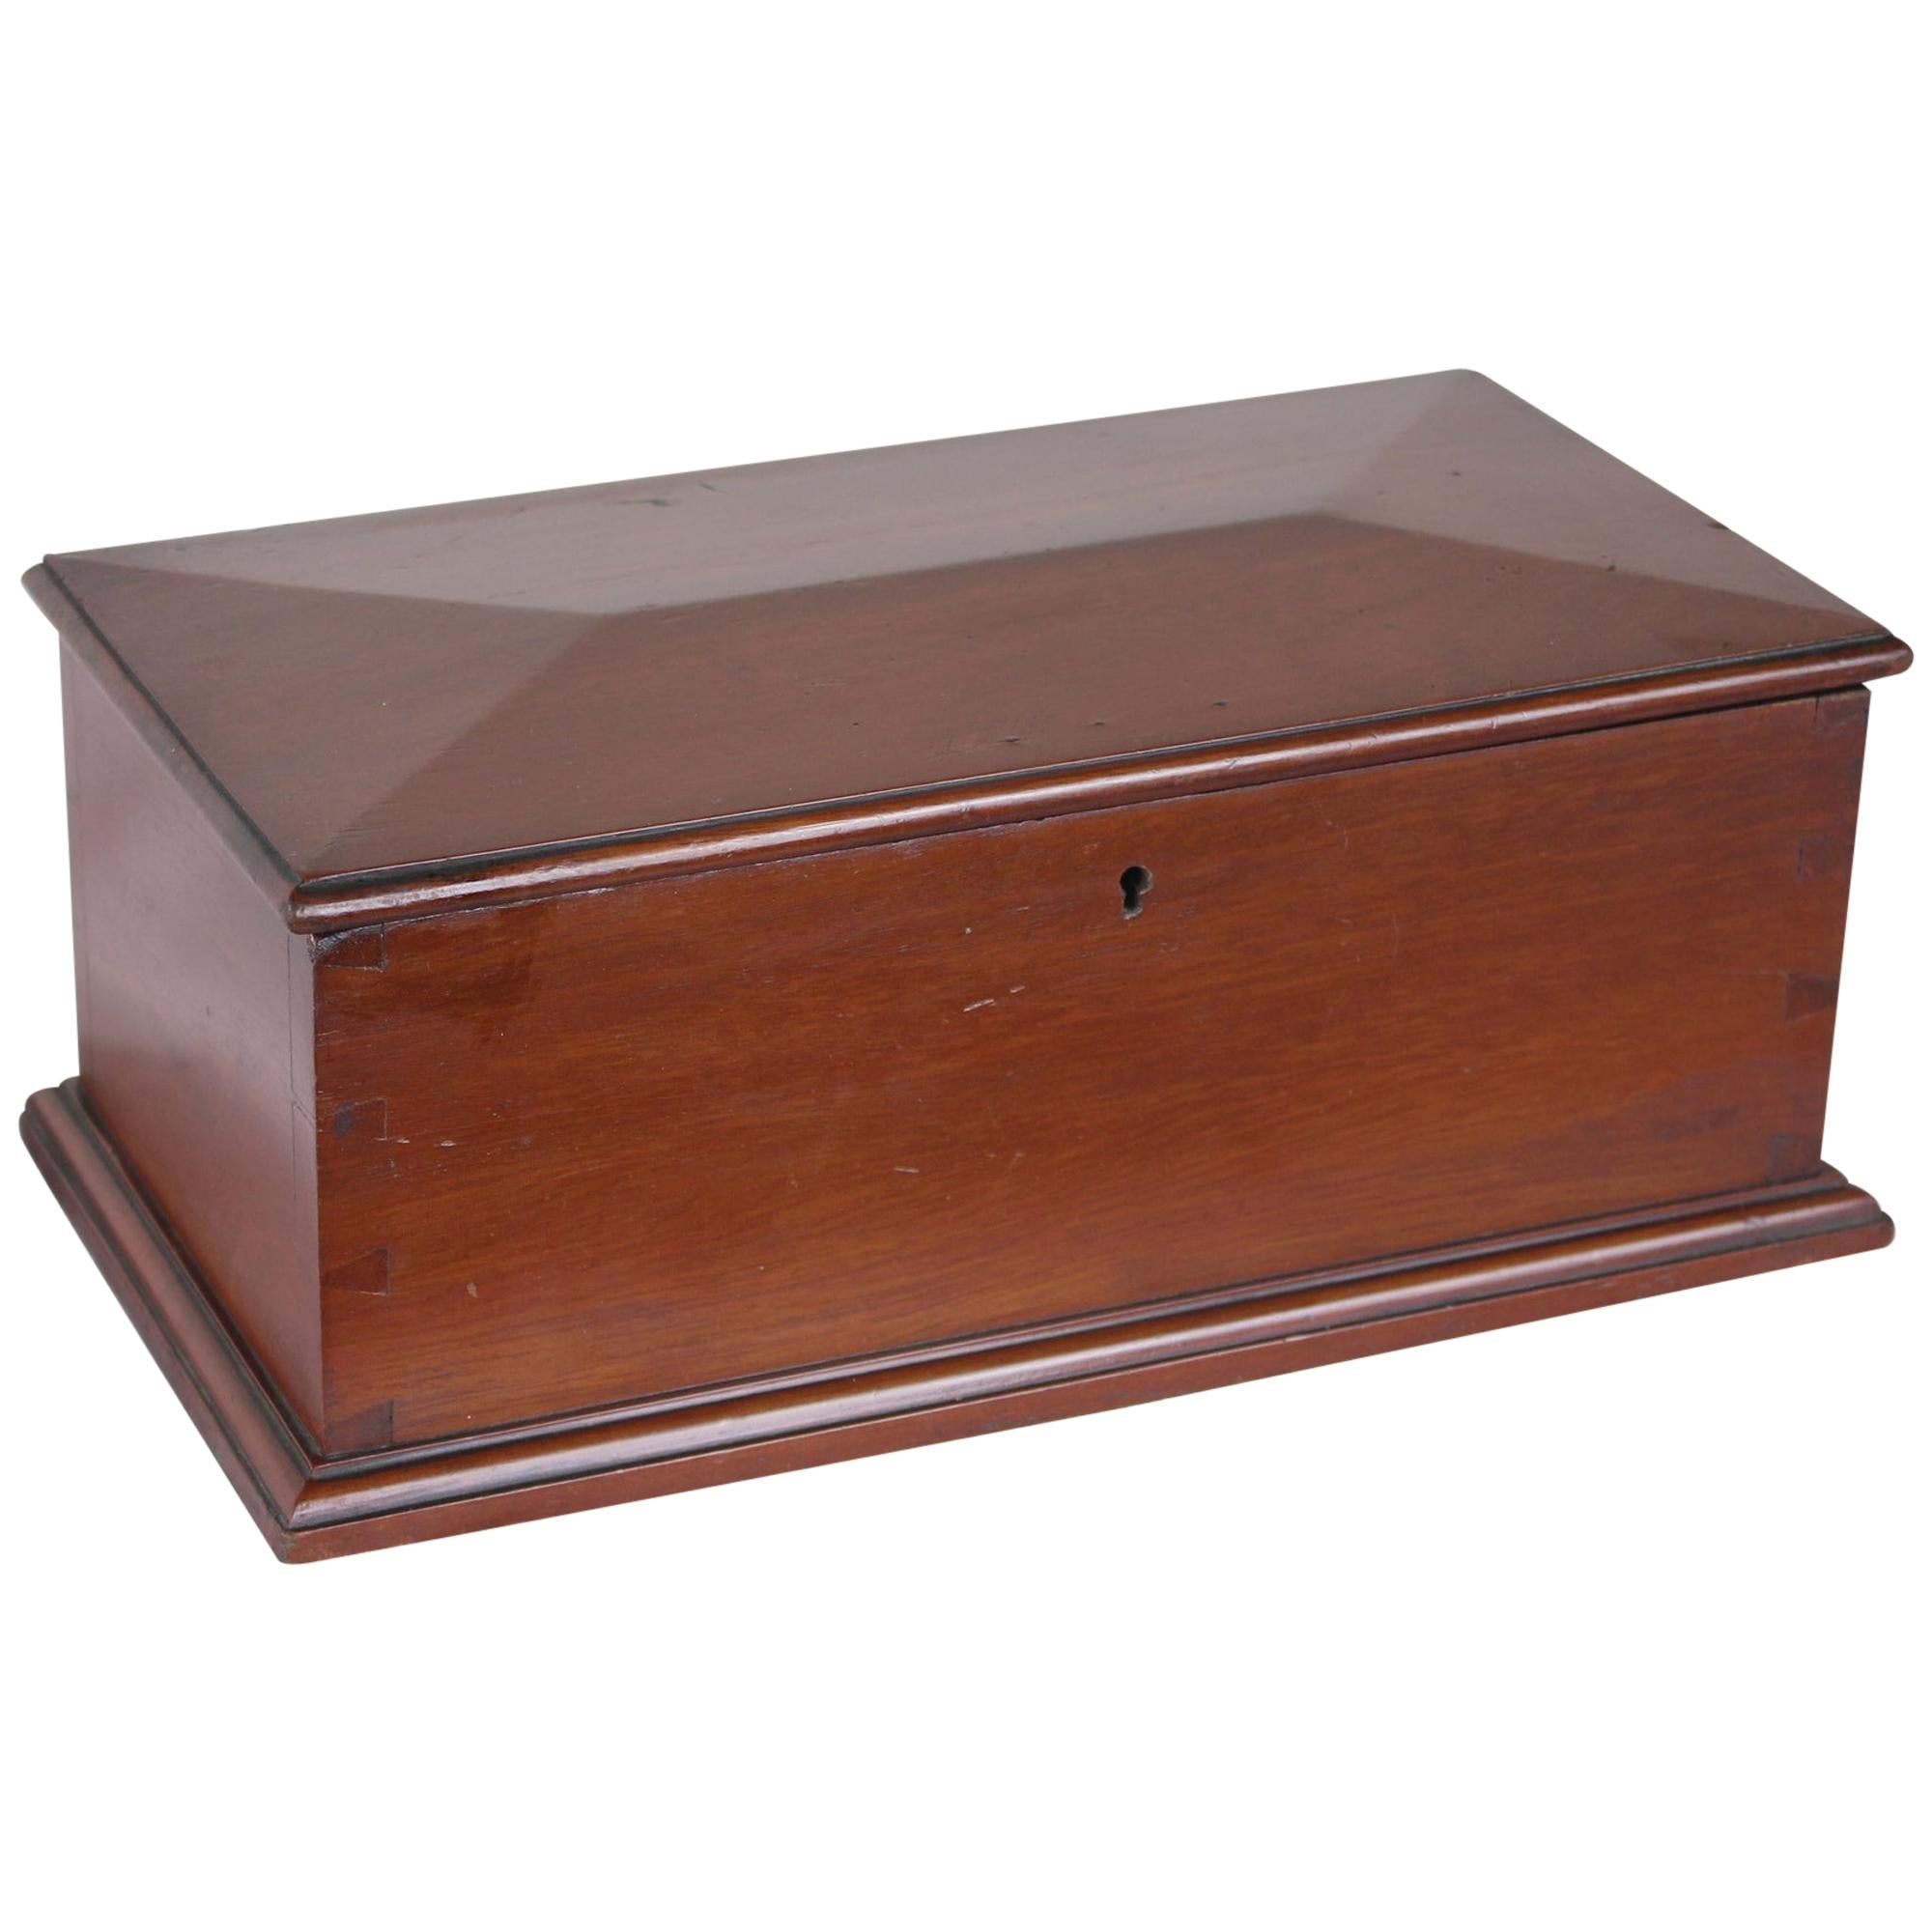 Antique Mahogany Jewelry Box with Shaped Top